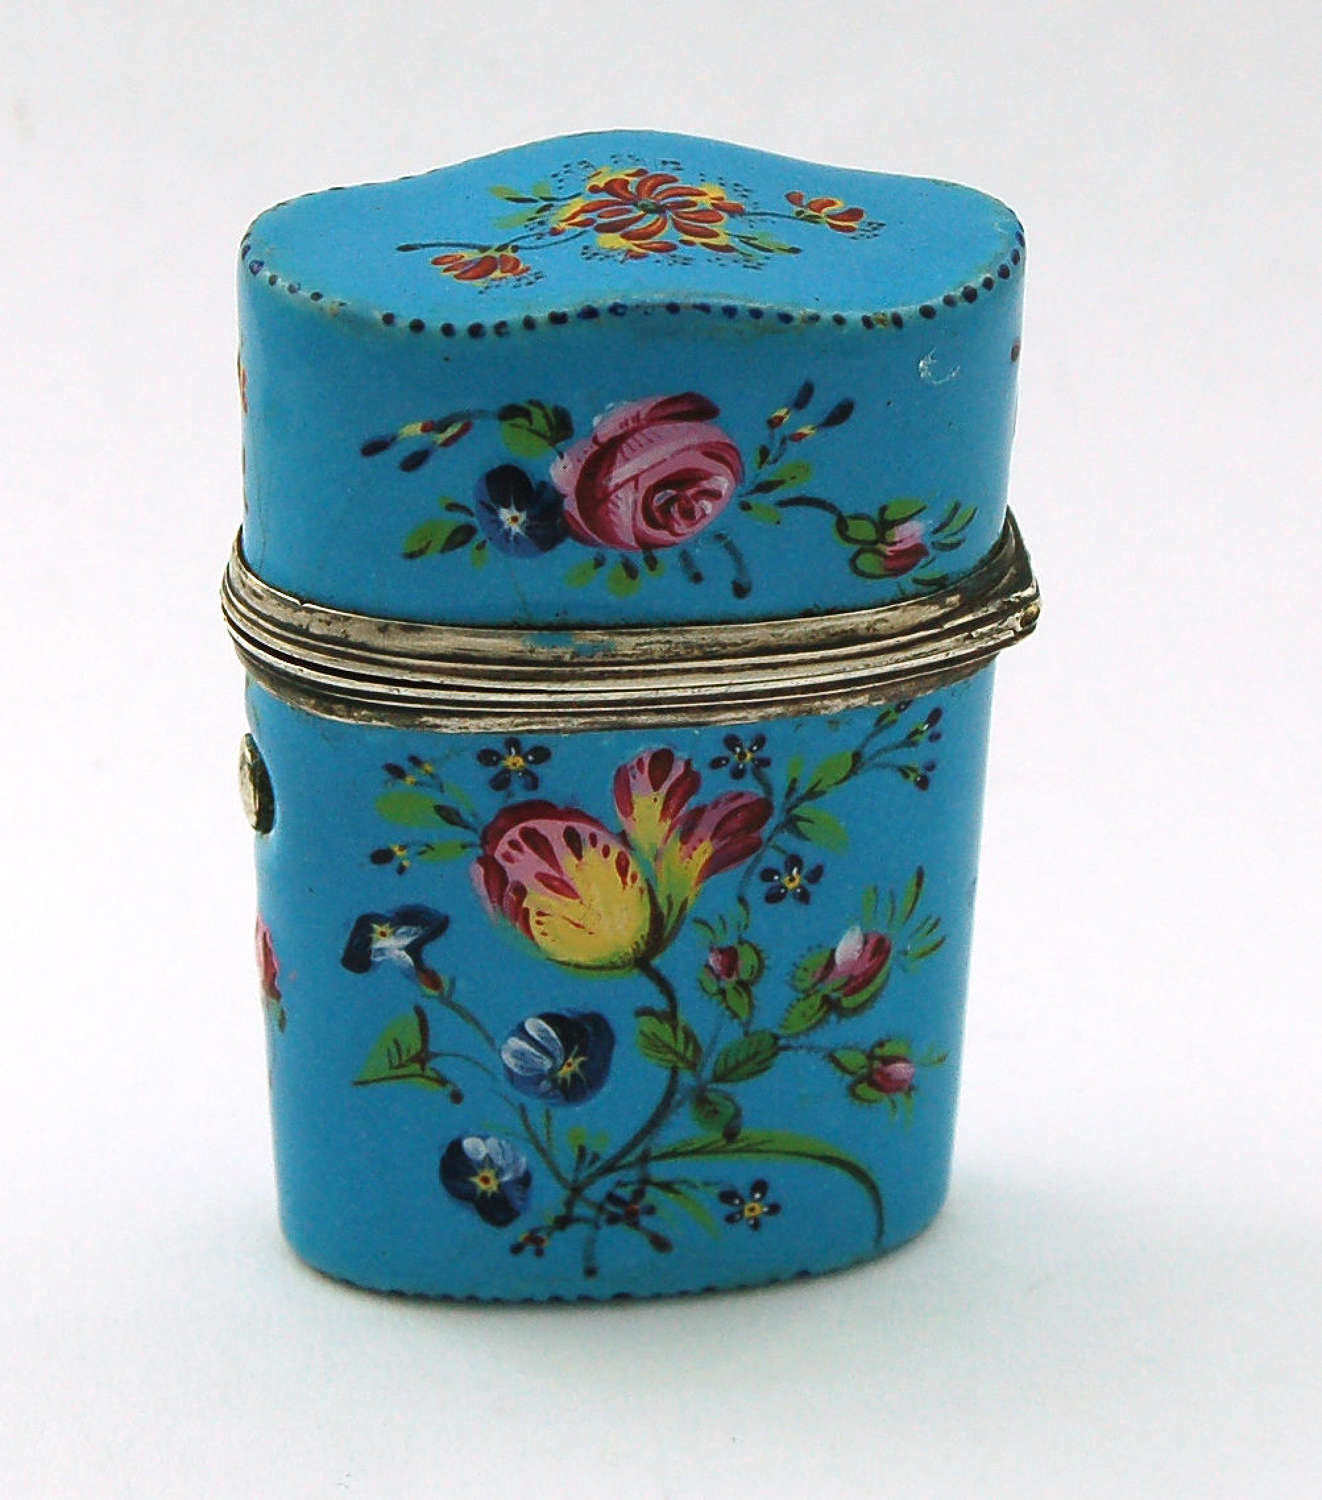 Turquoise enamel scent holder with silver mounts C1770